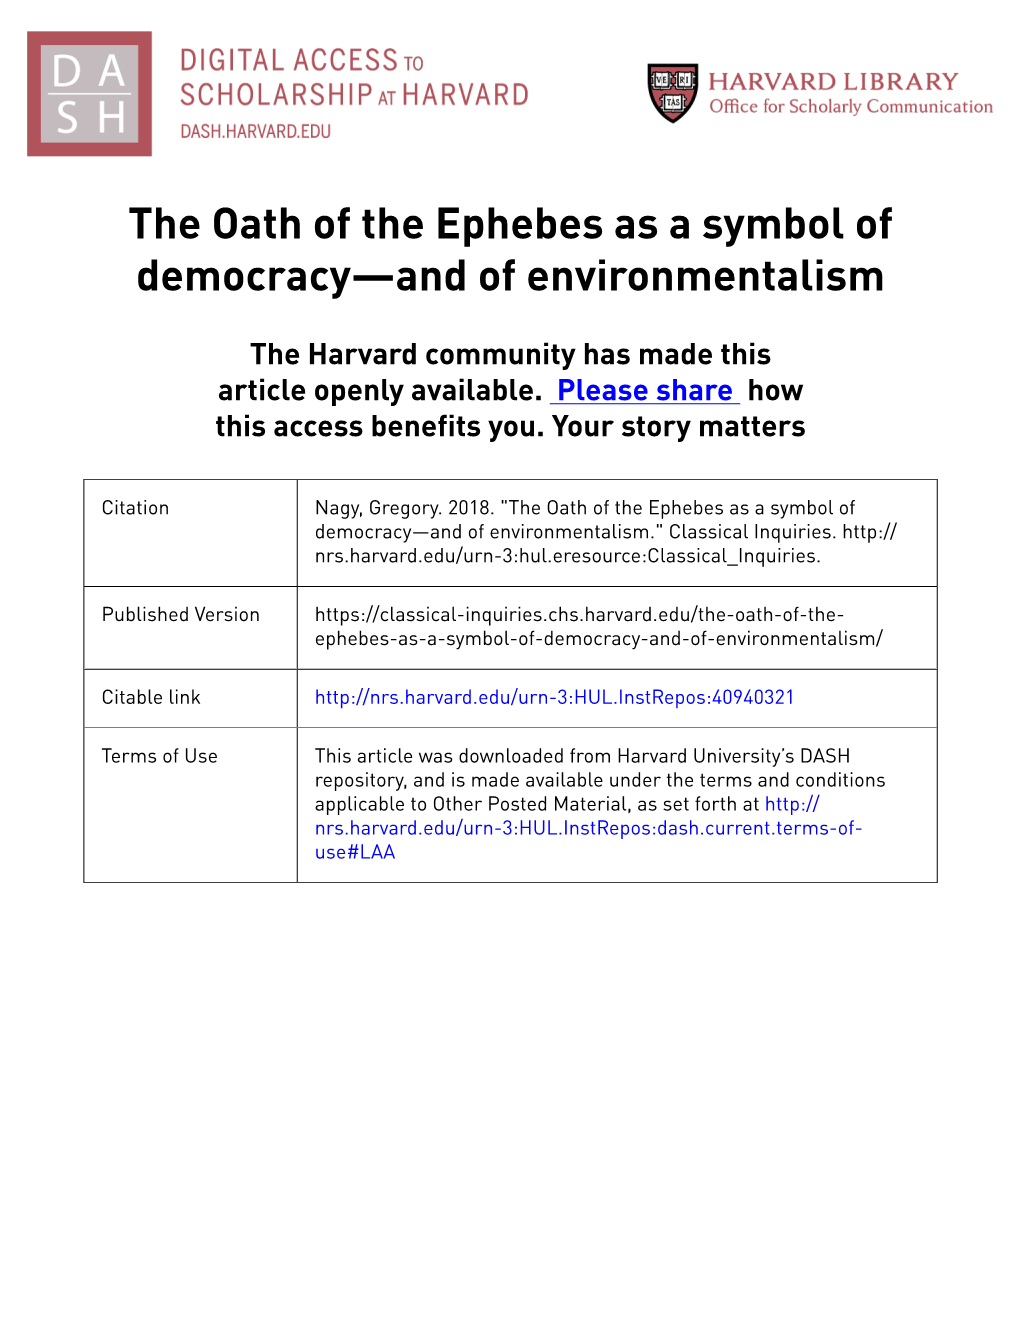 The Oath of the Ephebes As a Symbol of Democracy—And of Environmentalism